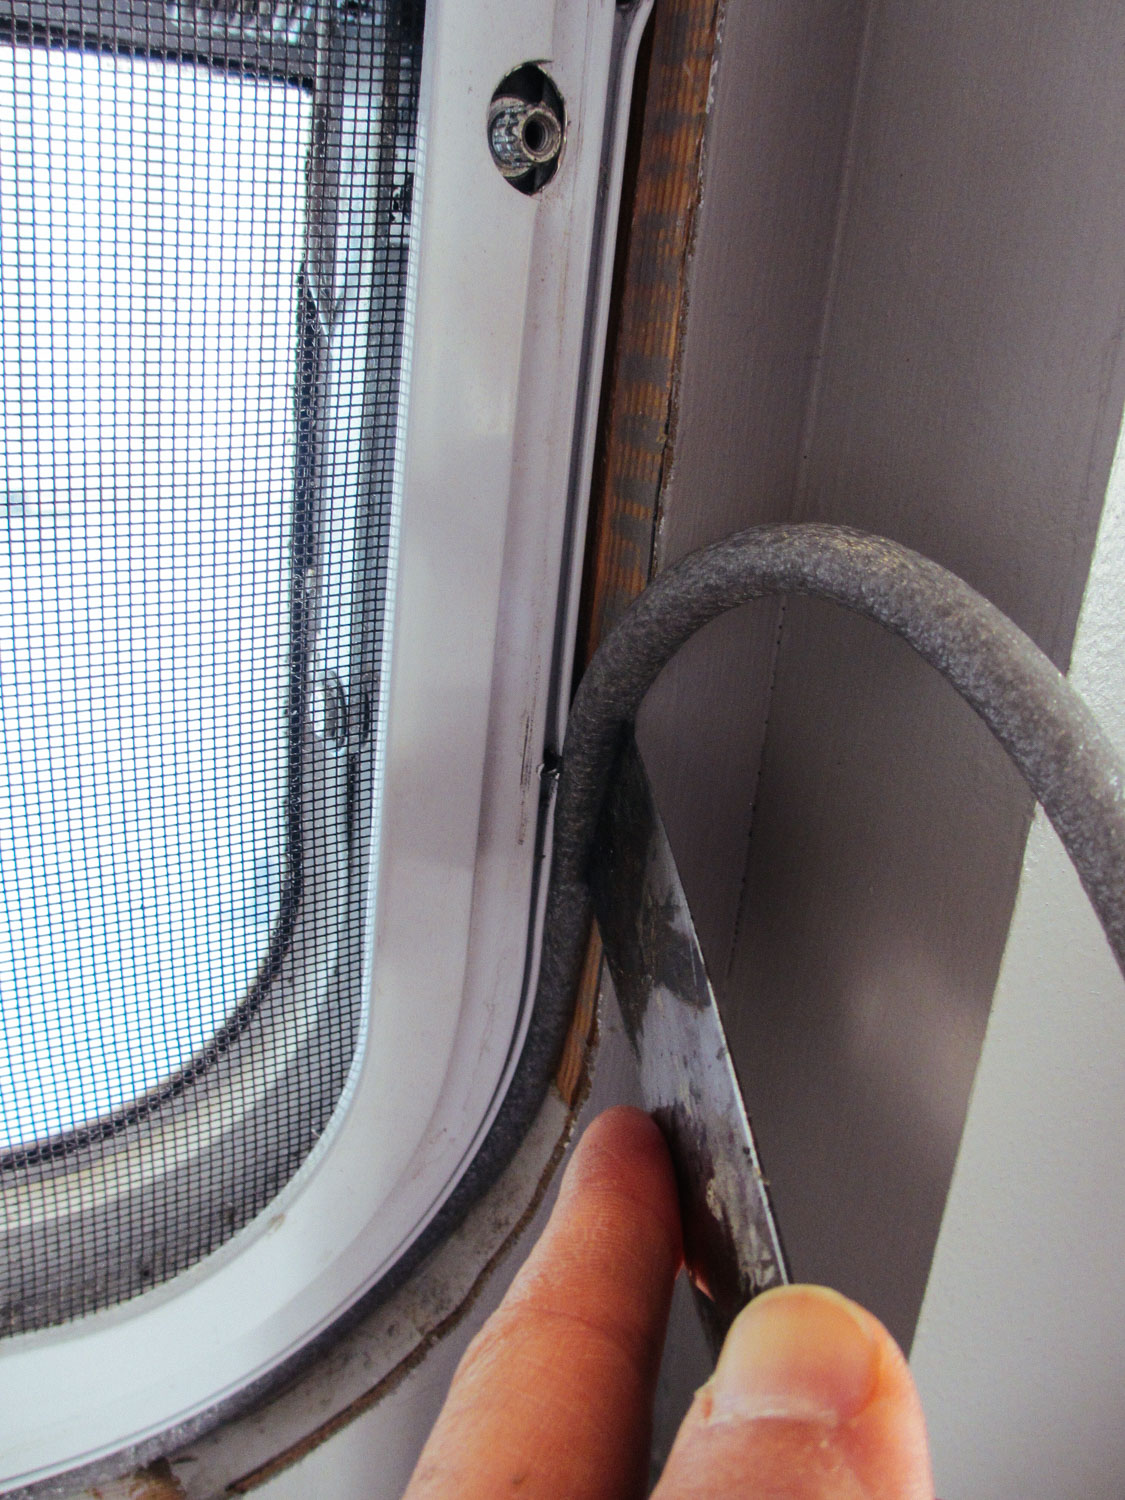  When the windows were reinstalled throughout the rig, we stuffed insulation tubing in the gap between the window and wall. 